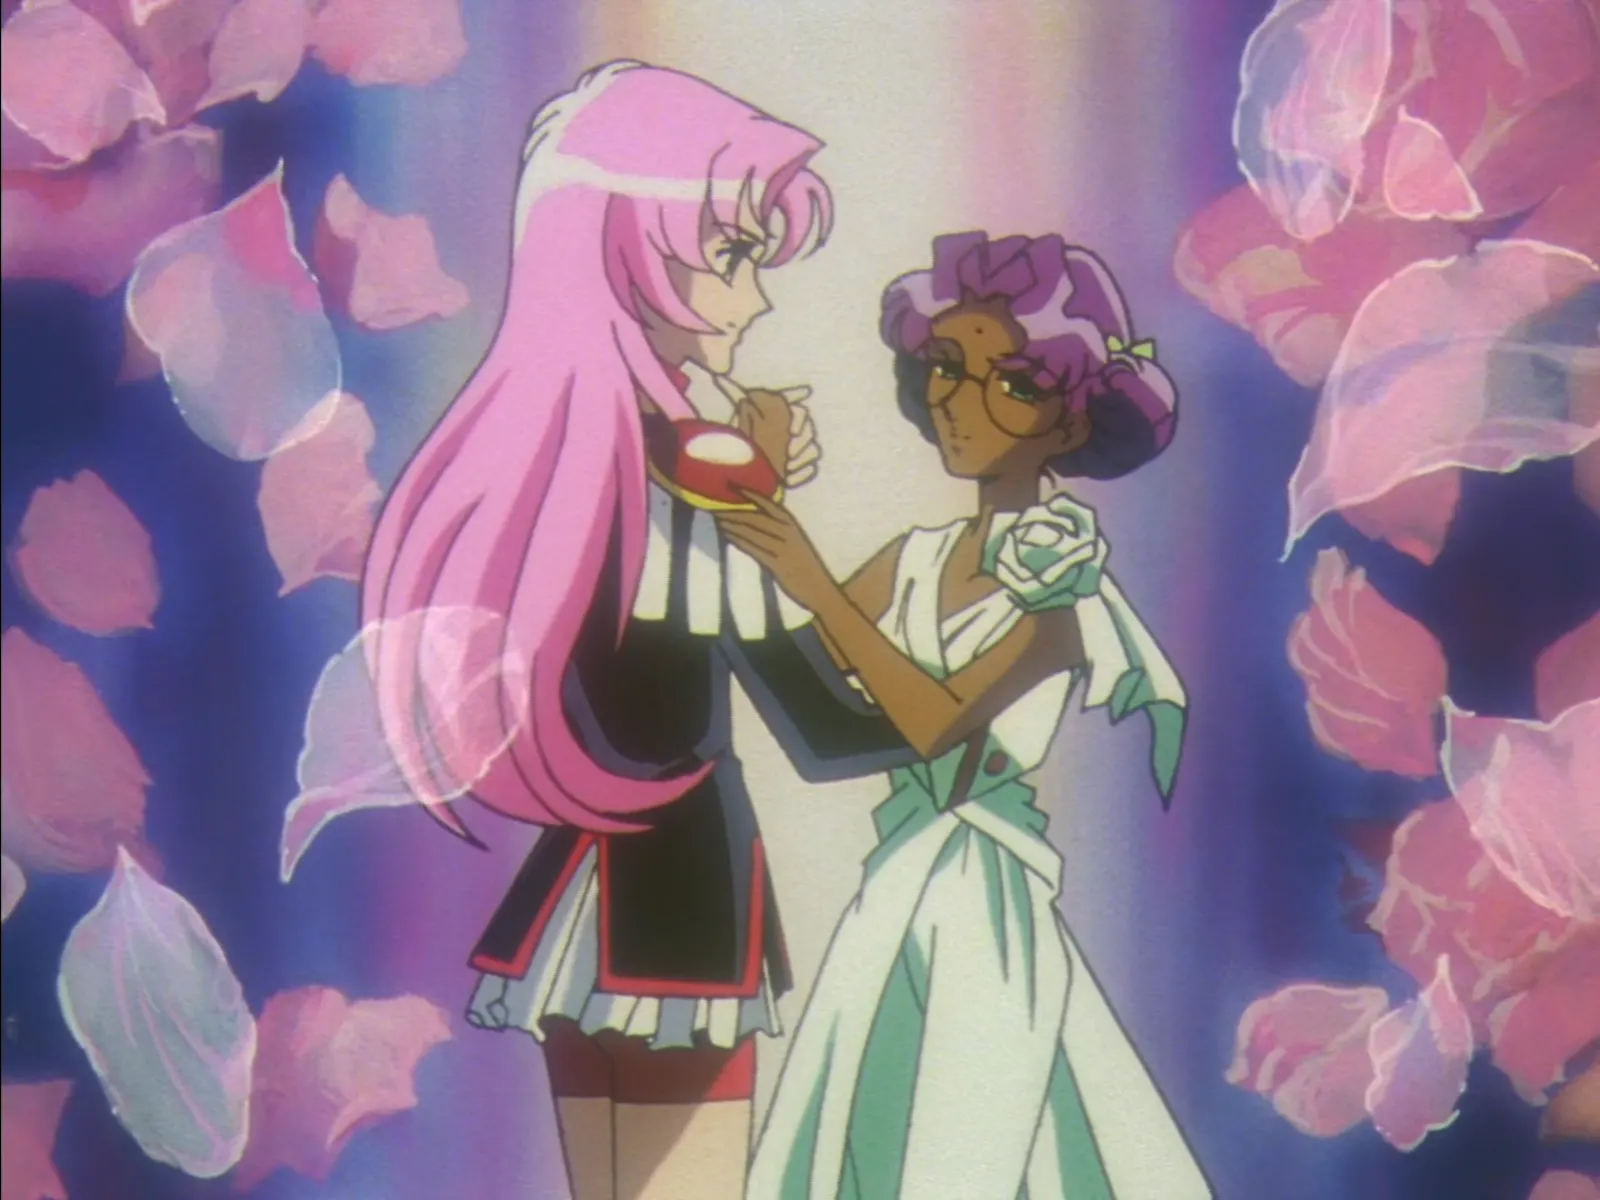 Utena forgoes a dance with any of those stinky boys and shows her bride a good time instead